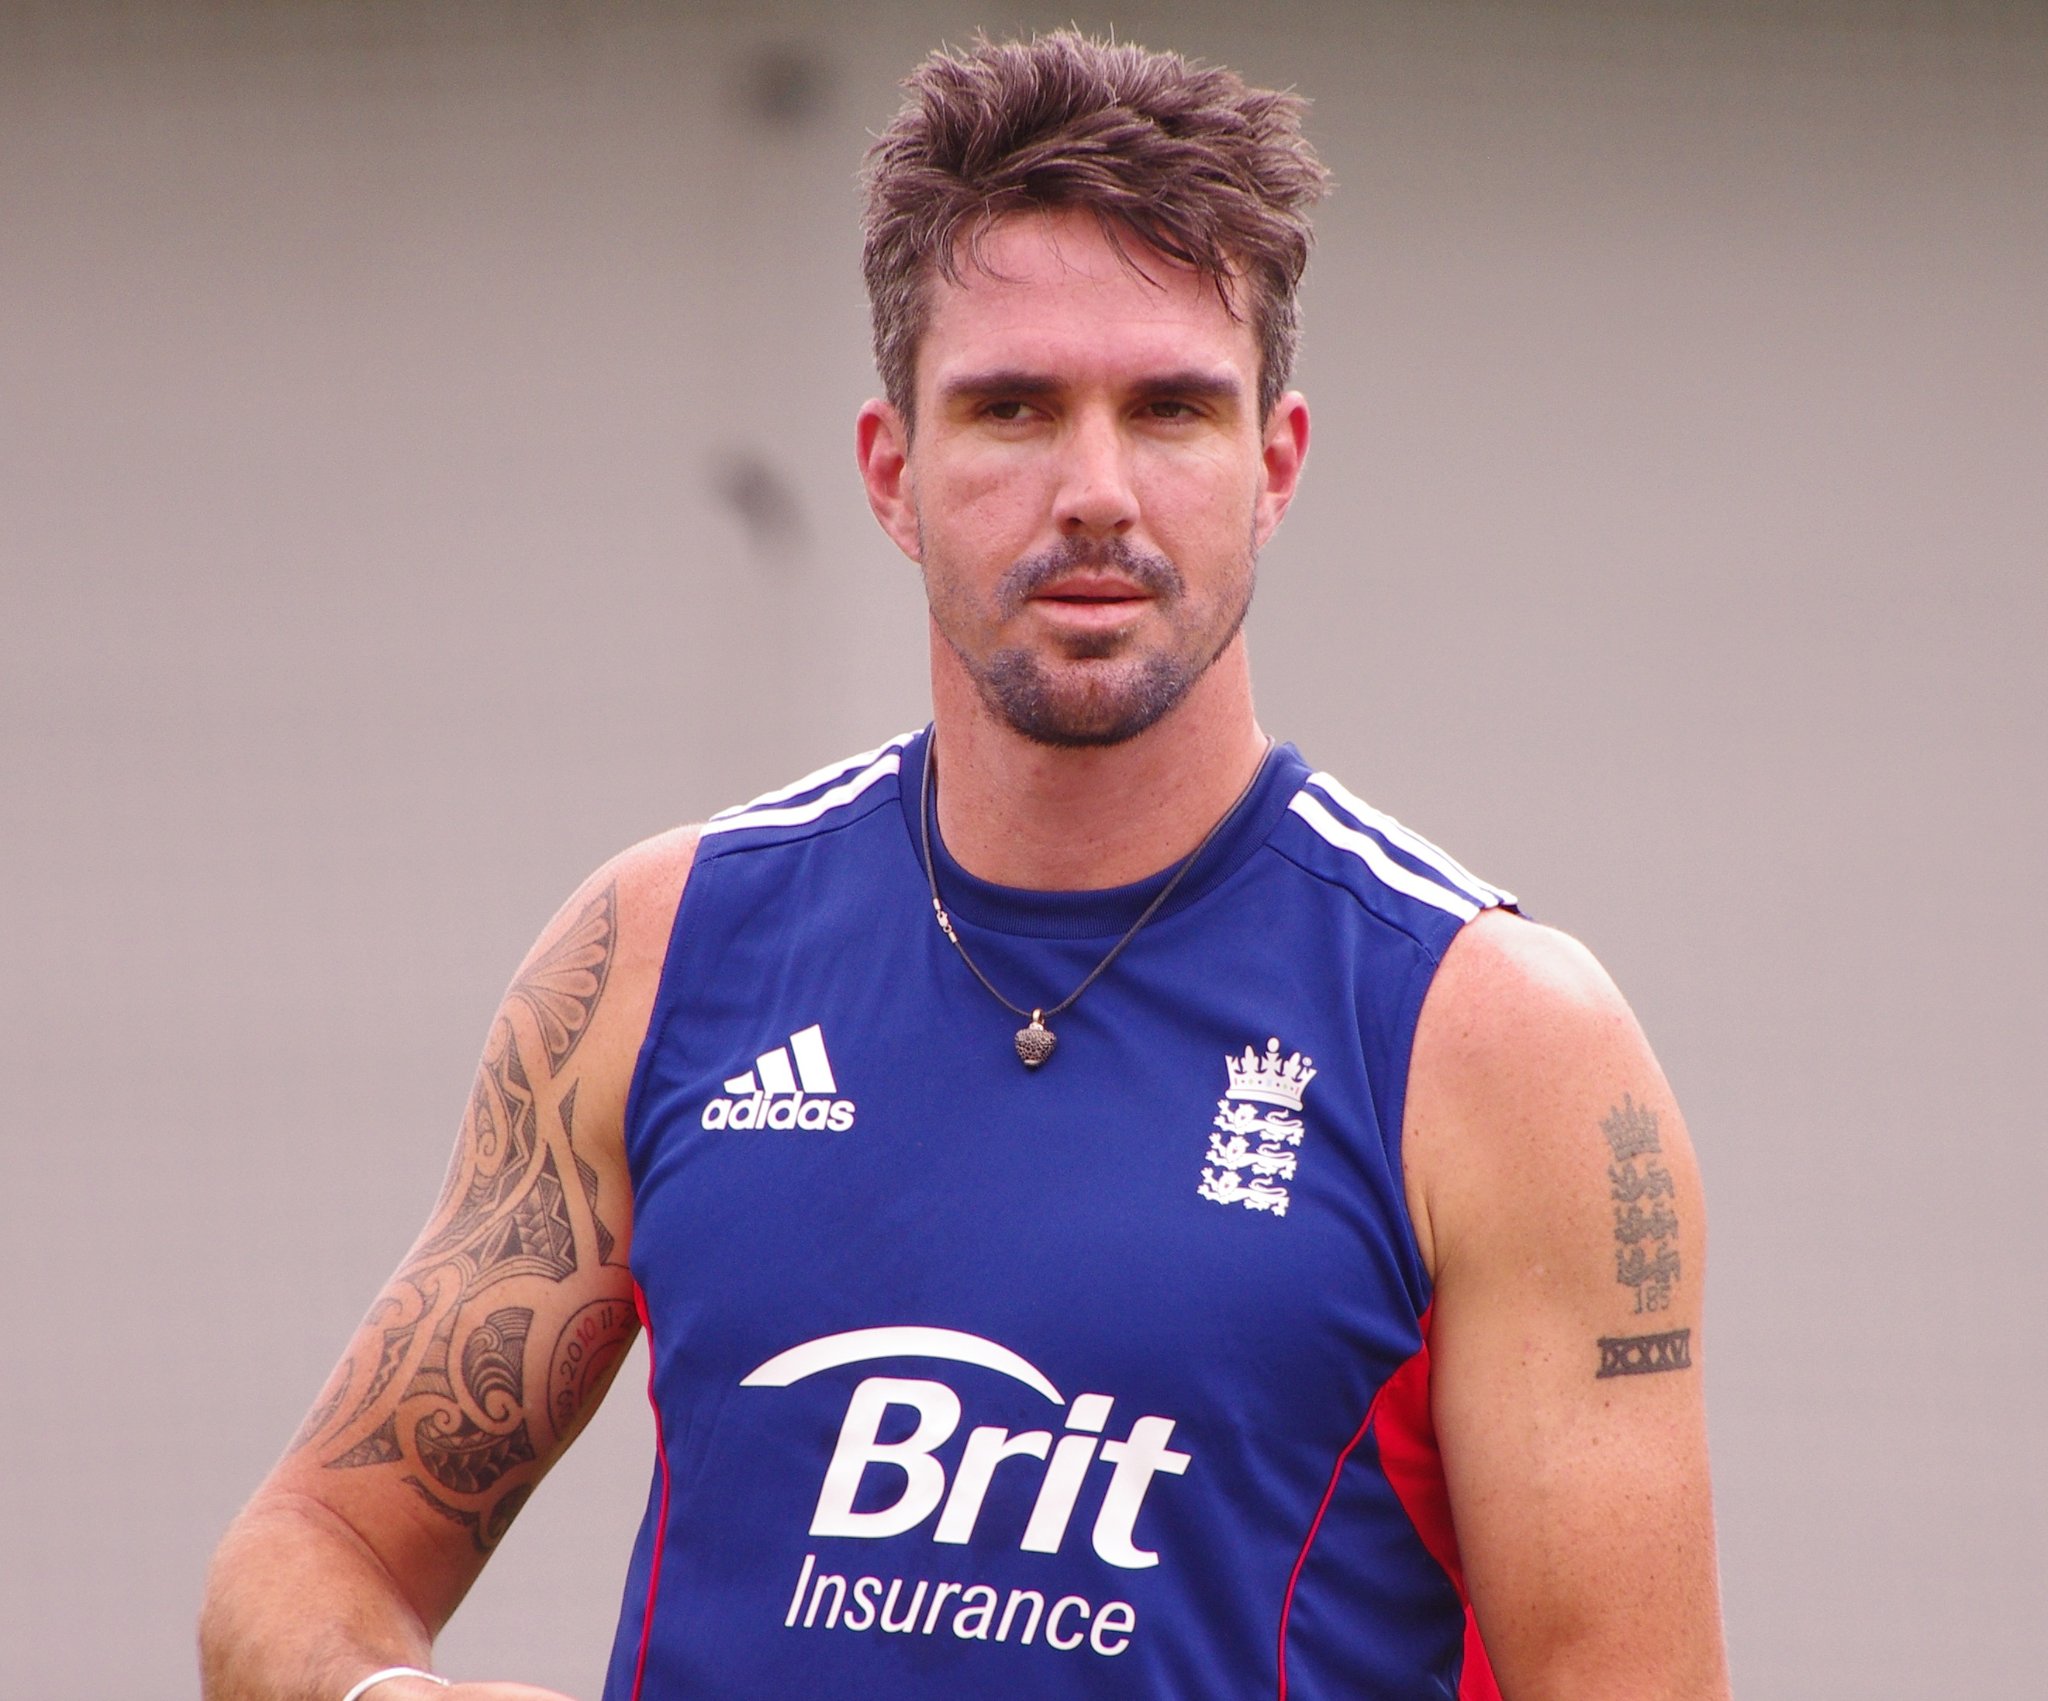 Happy birthday to one of the excellent Power Hitters , Kevin Pietersen. 